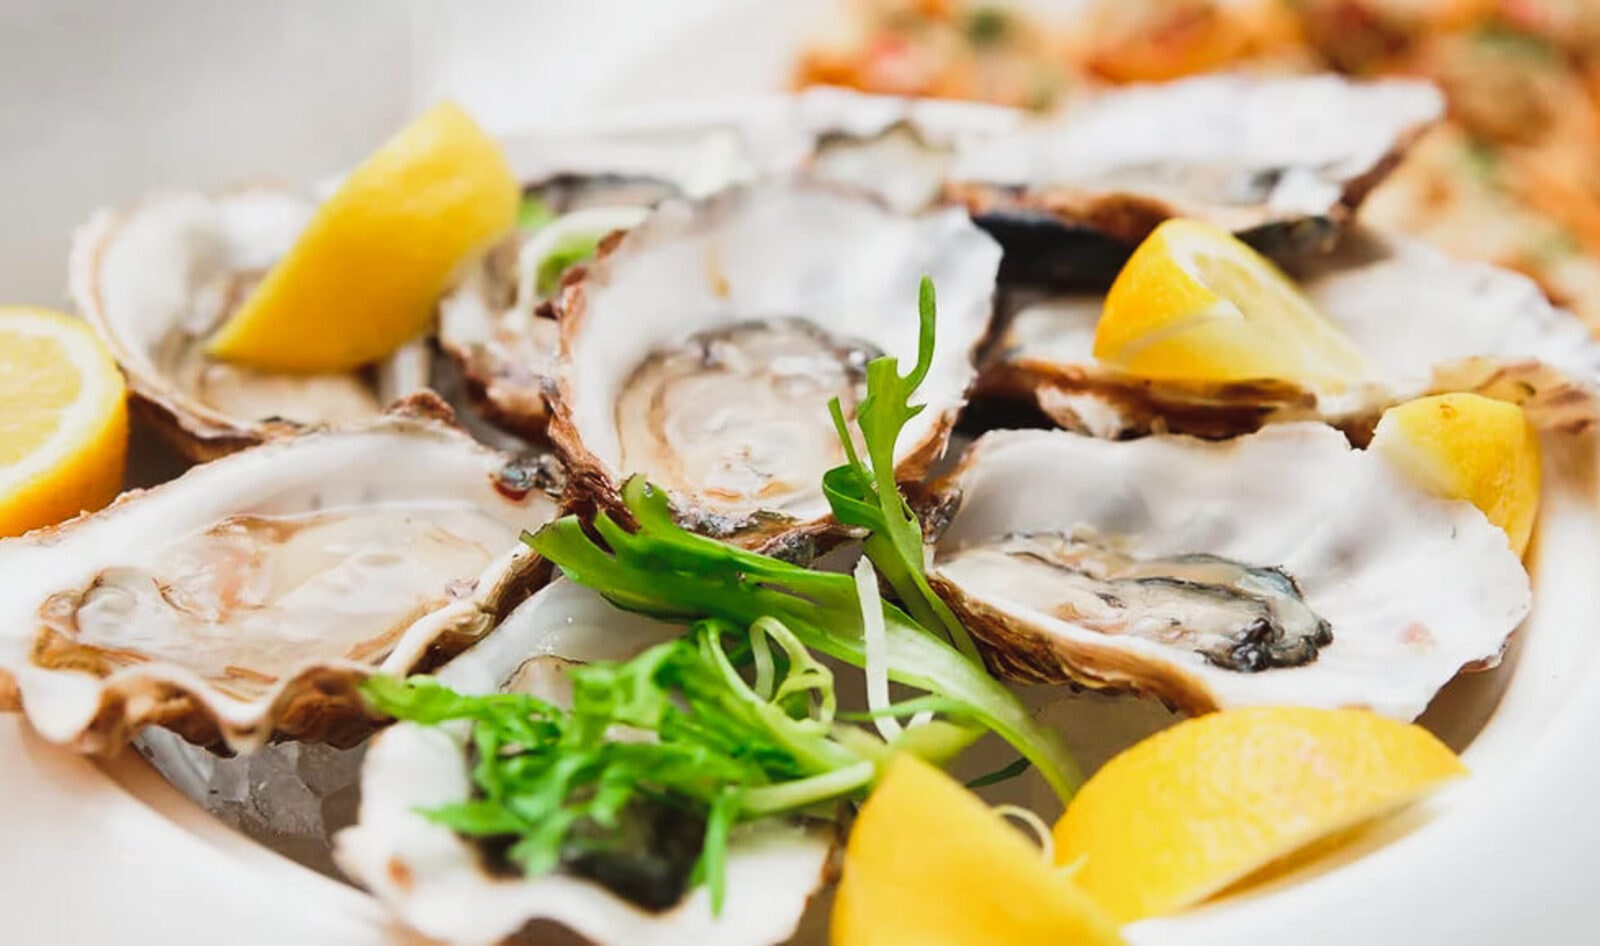 Vegan Oysters in Shells? This Startup Just Developed a Prototype to Save the Oceans